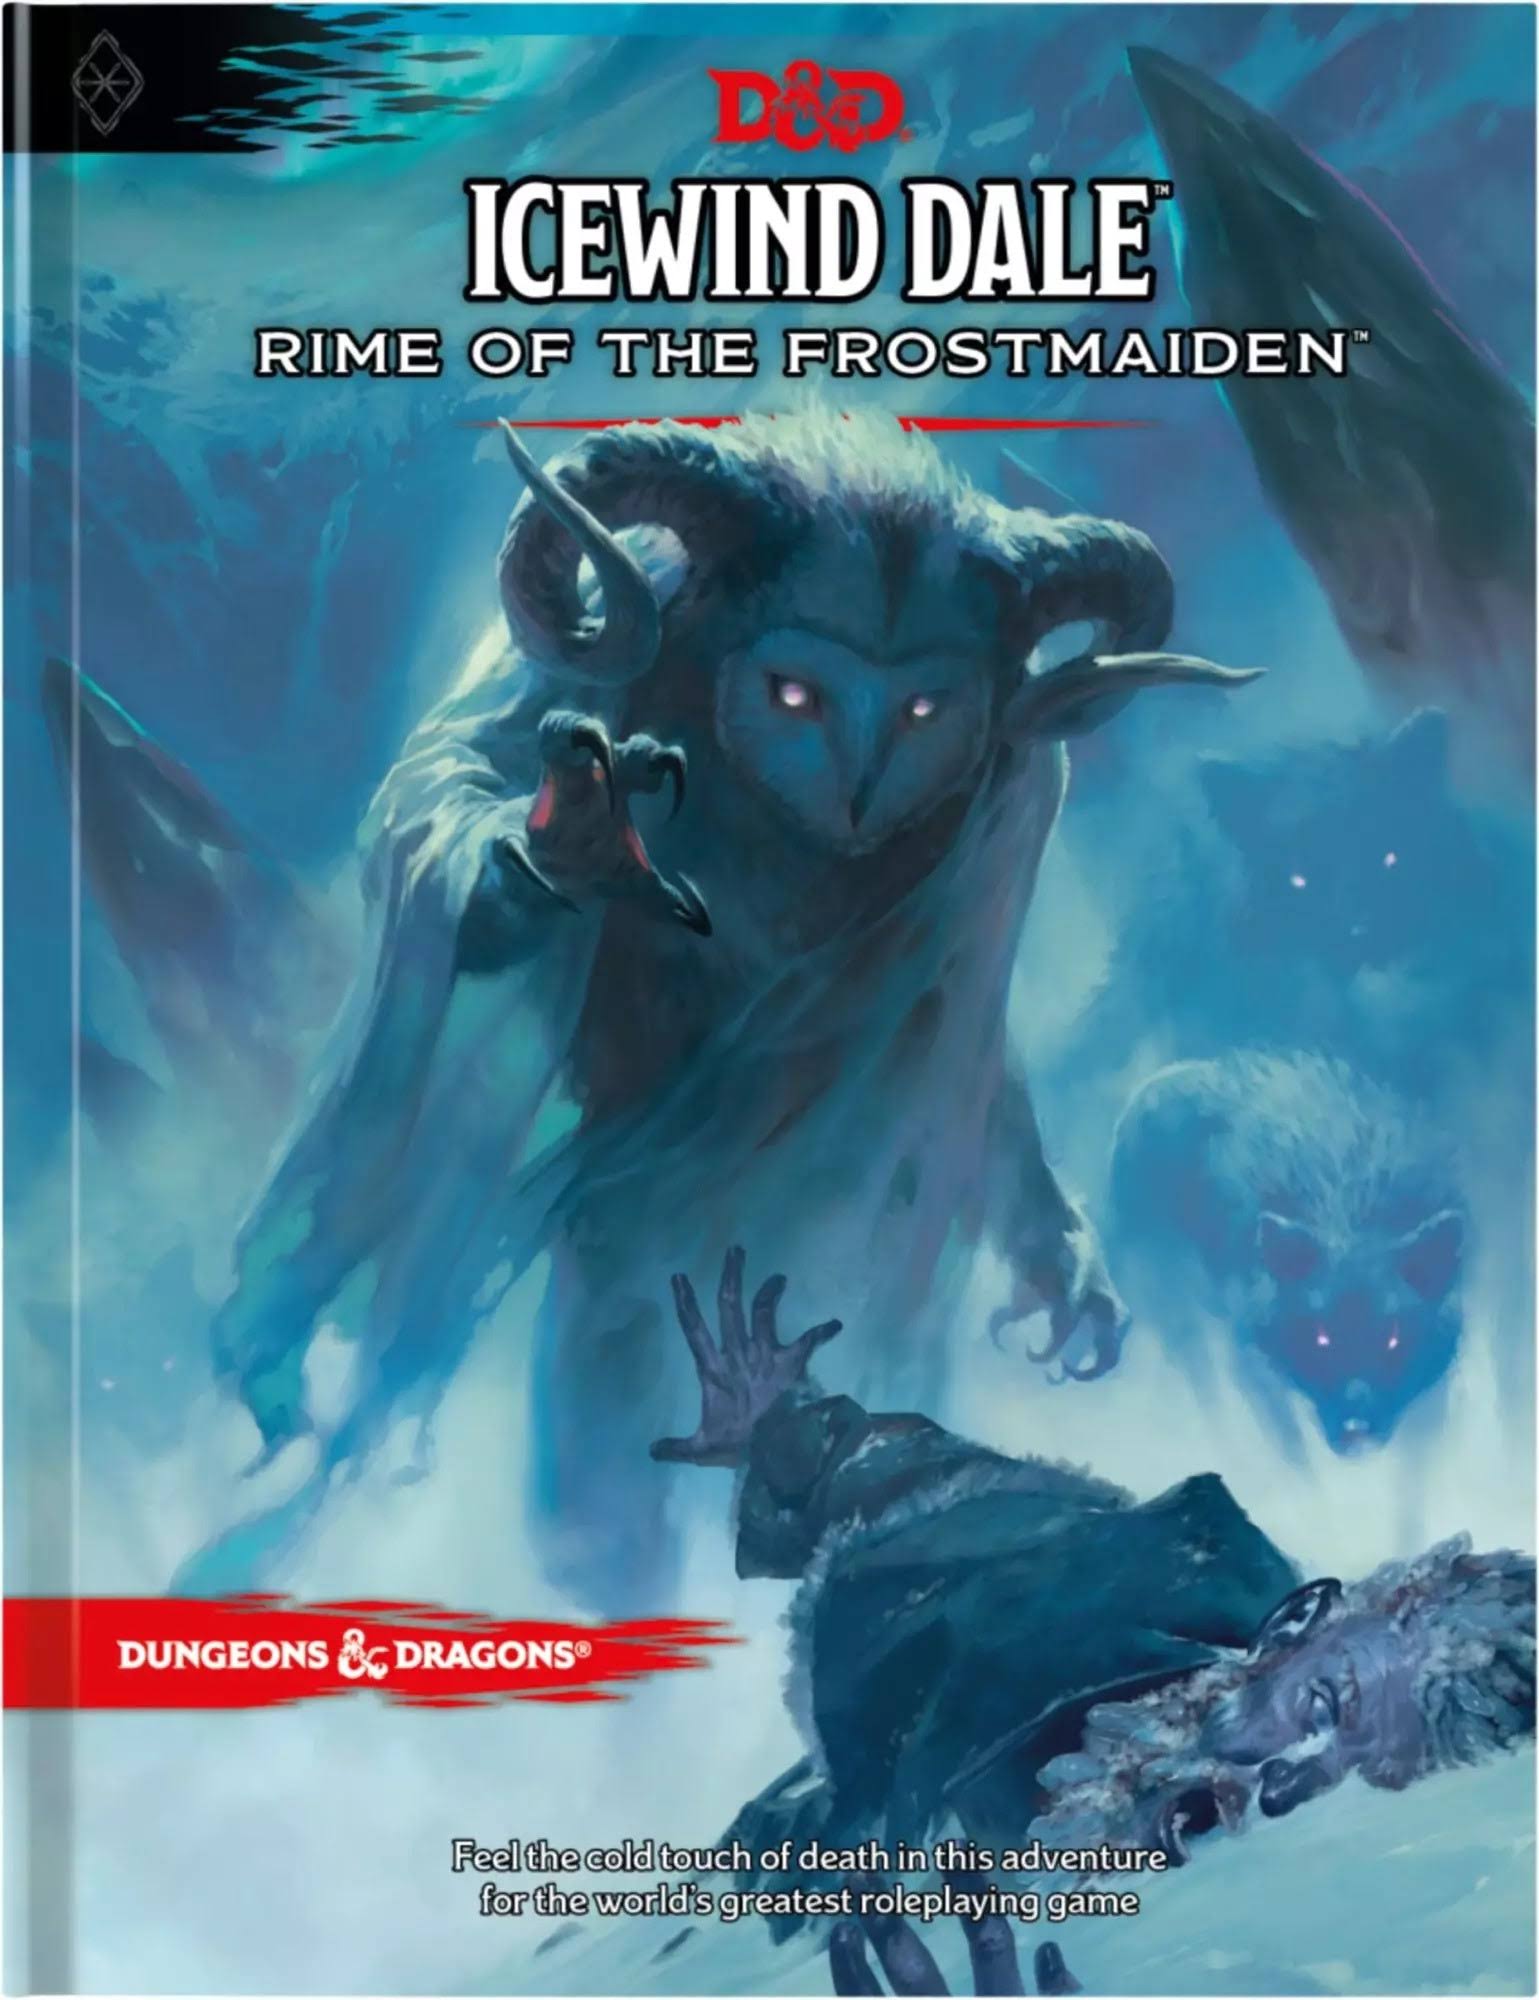 Icewind Dale: Rime of the Frostmaiden (D&D Adventure Book) (Dungeons & Dragons) [Book]